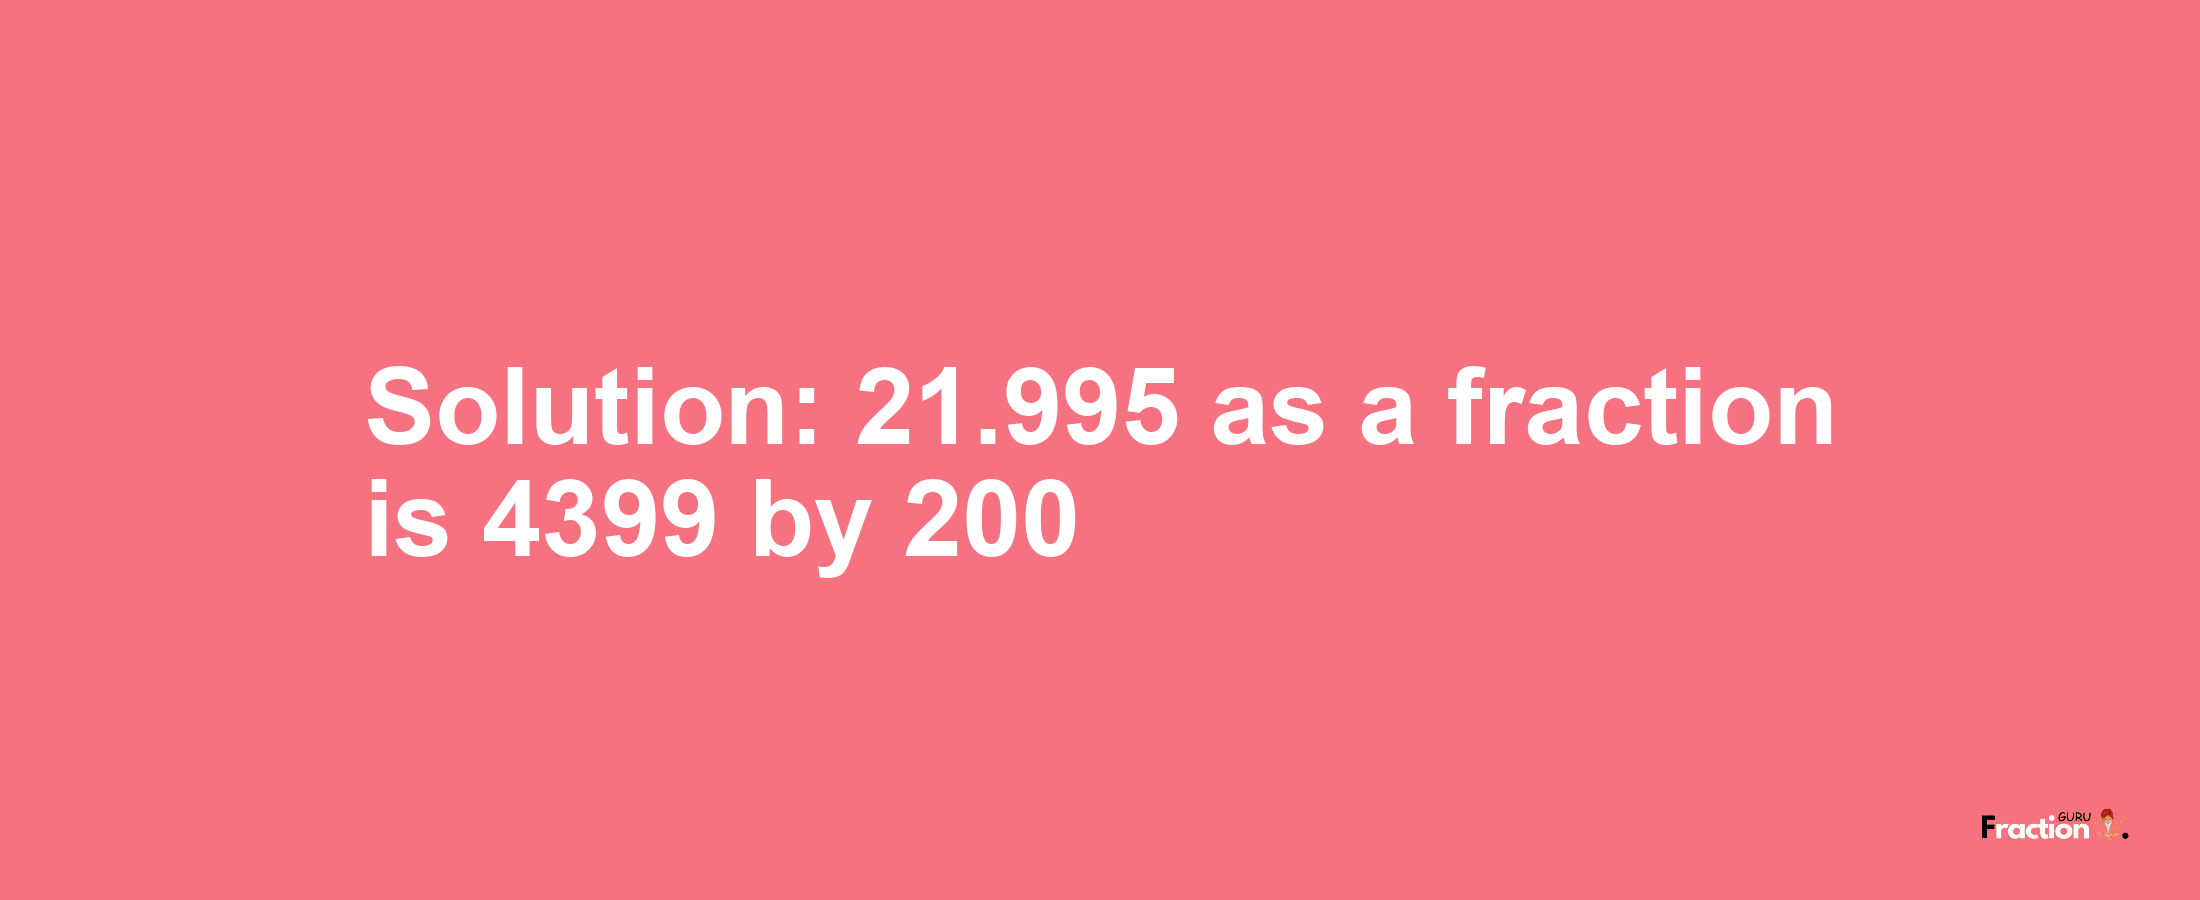 Solution:21.995 as a fraction is 4399/200